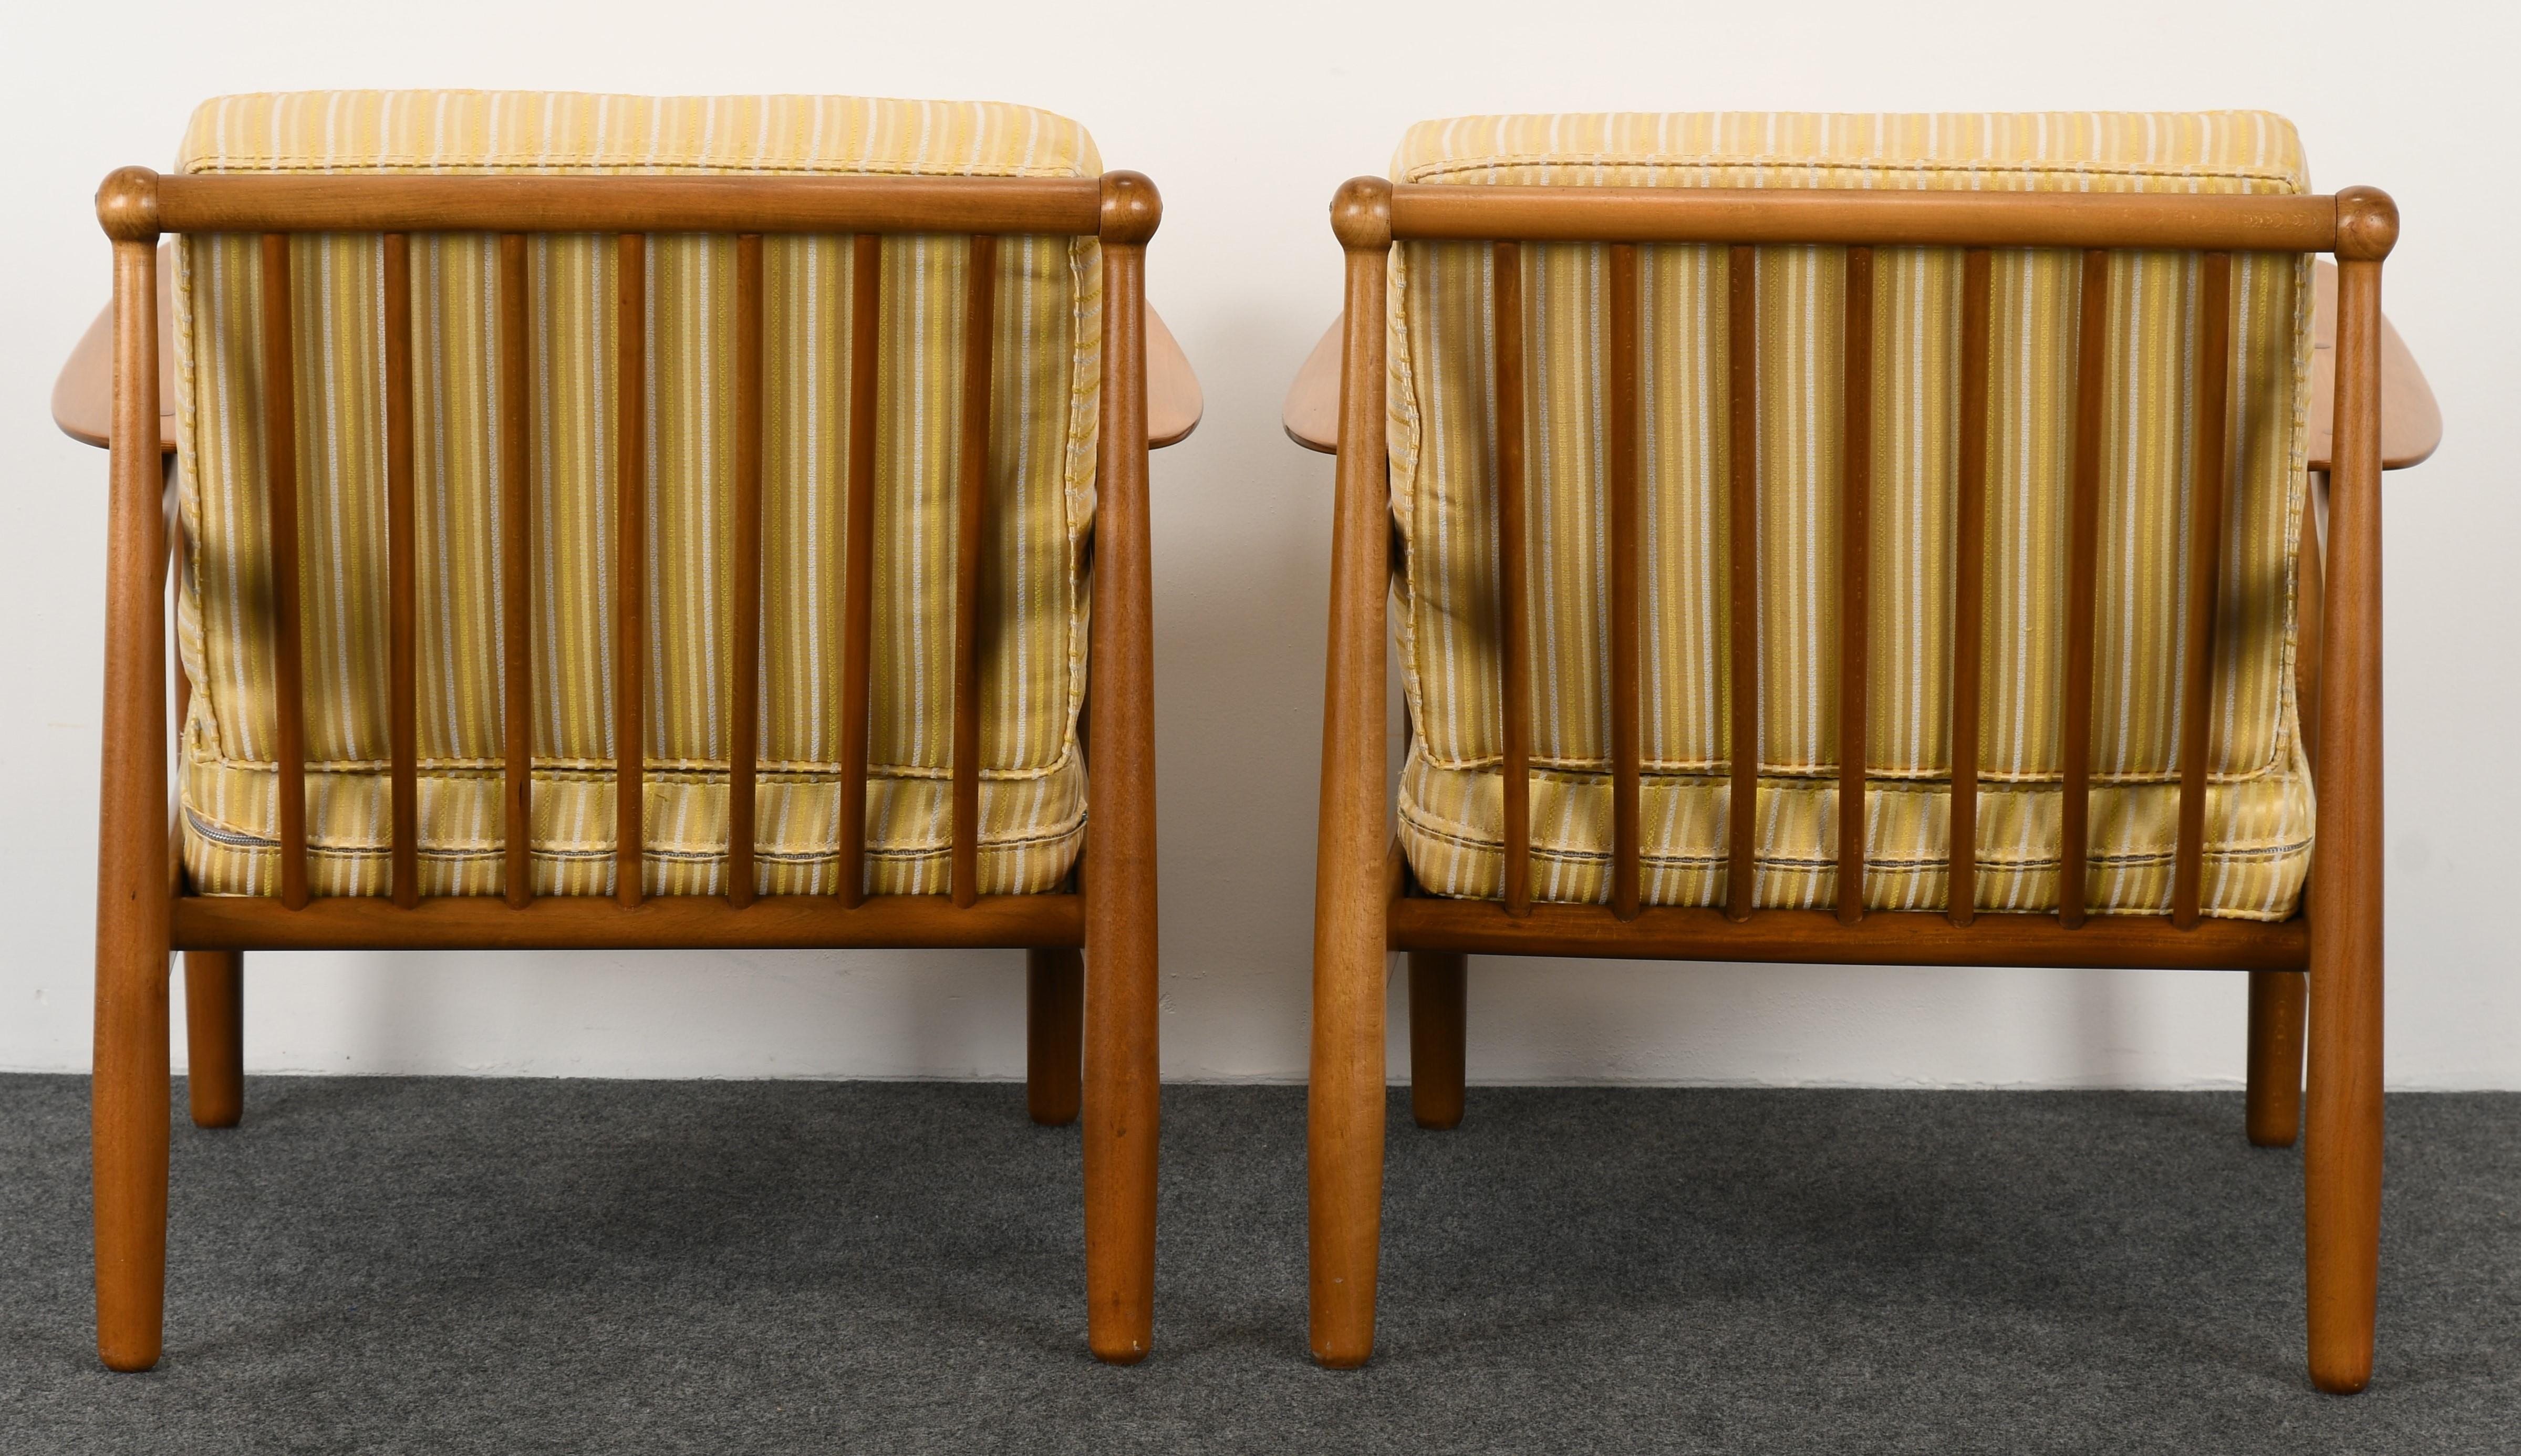 Upholstery Pair of Danish Modern Chairs by P. Jeppesen, 1955